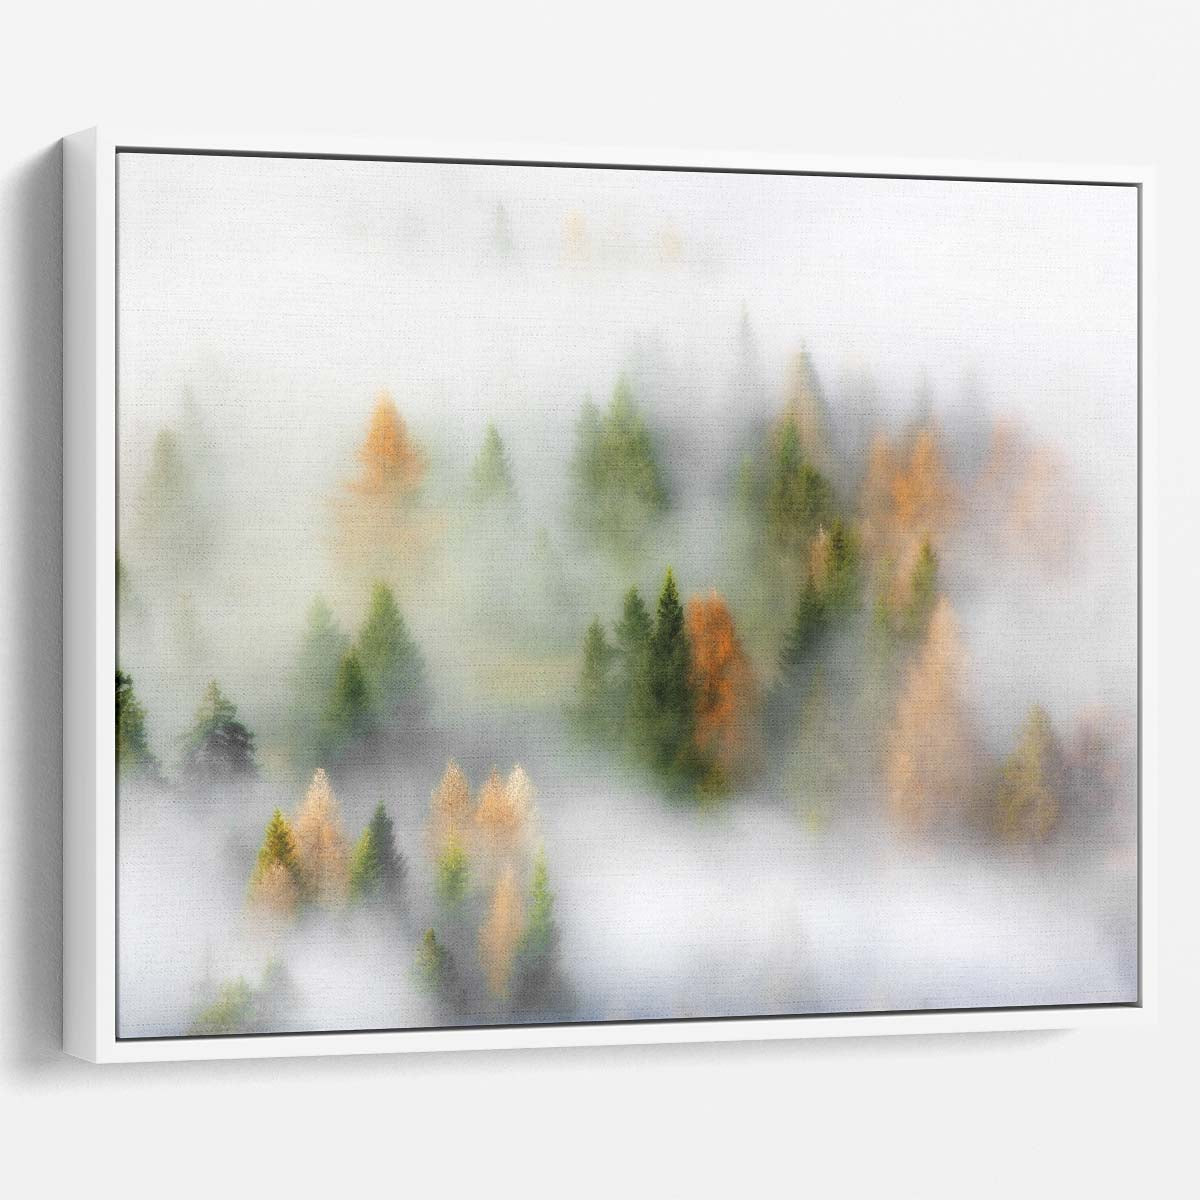 Misty Autumn Forest Aerial View Wall Art by Luxuriance Designs. Made in USA.